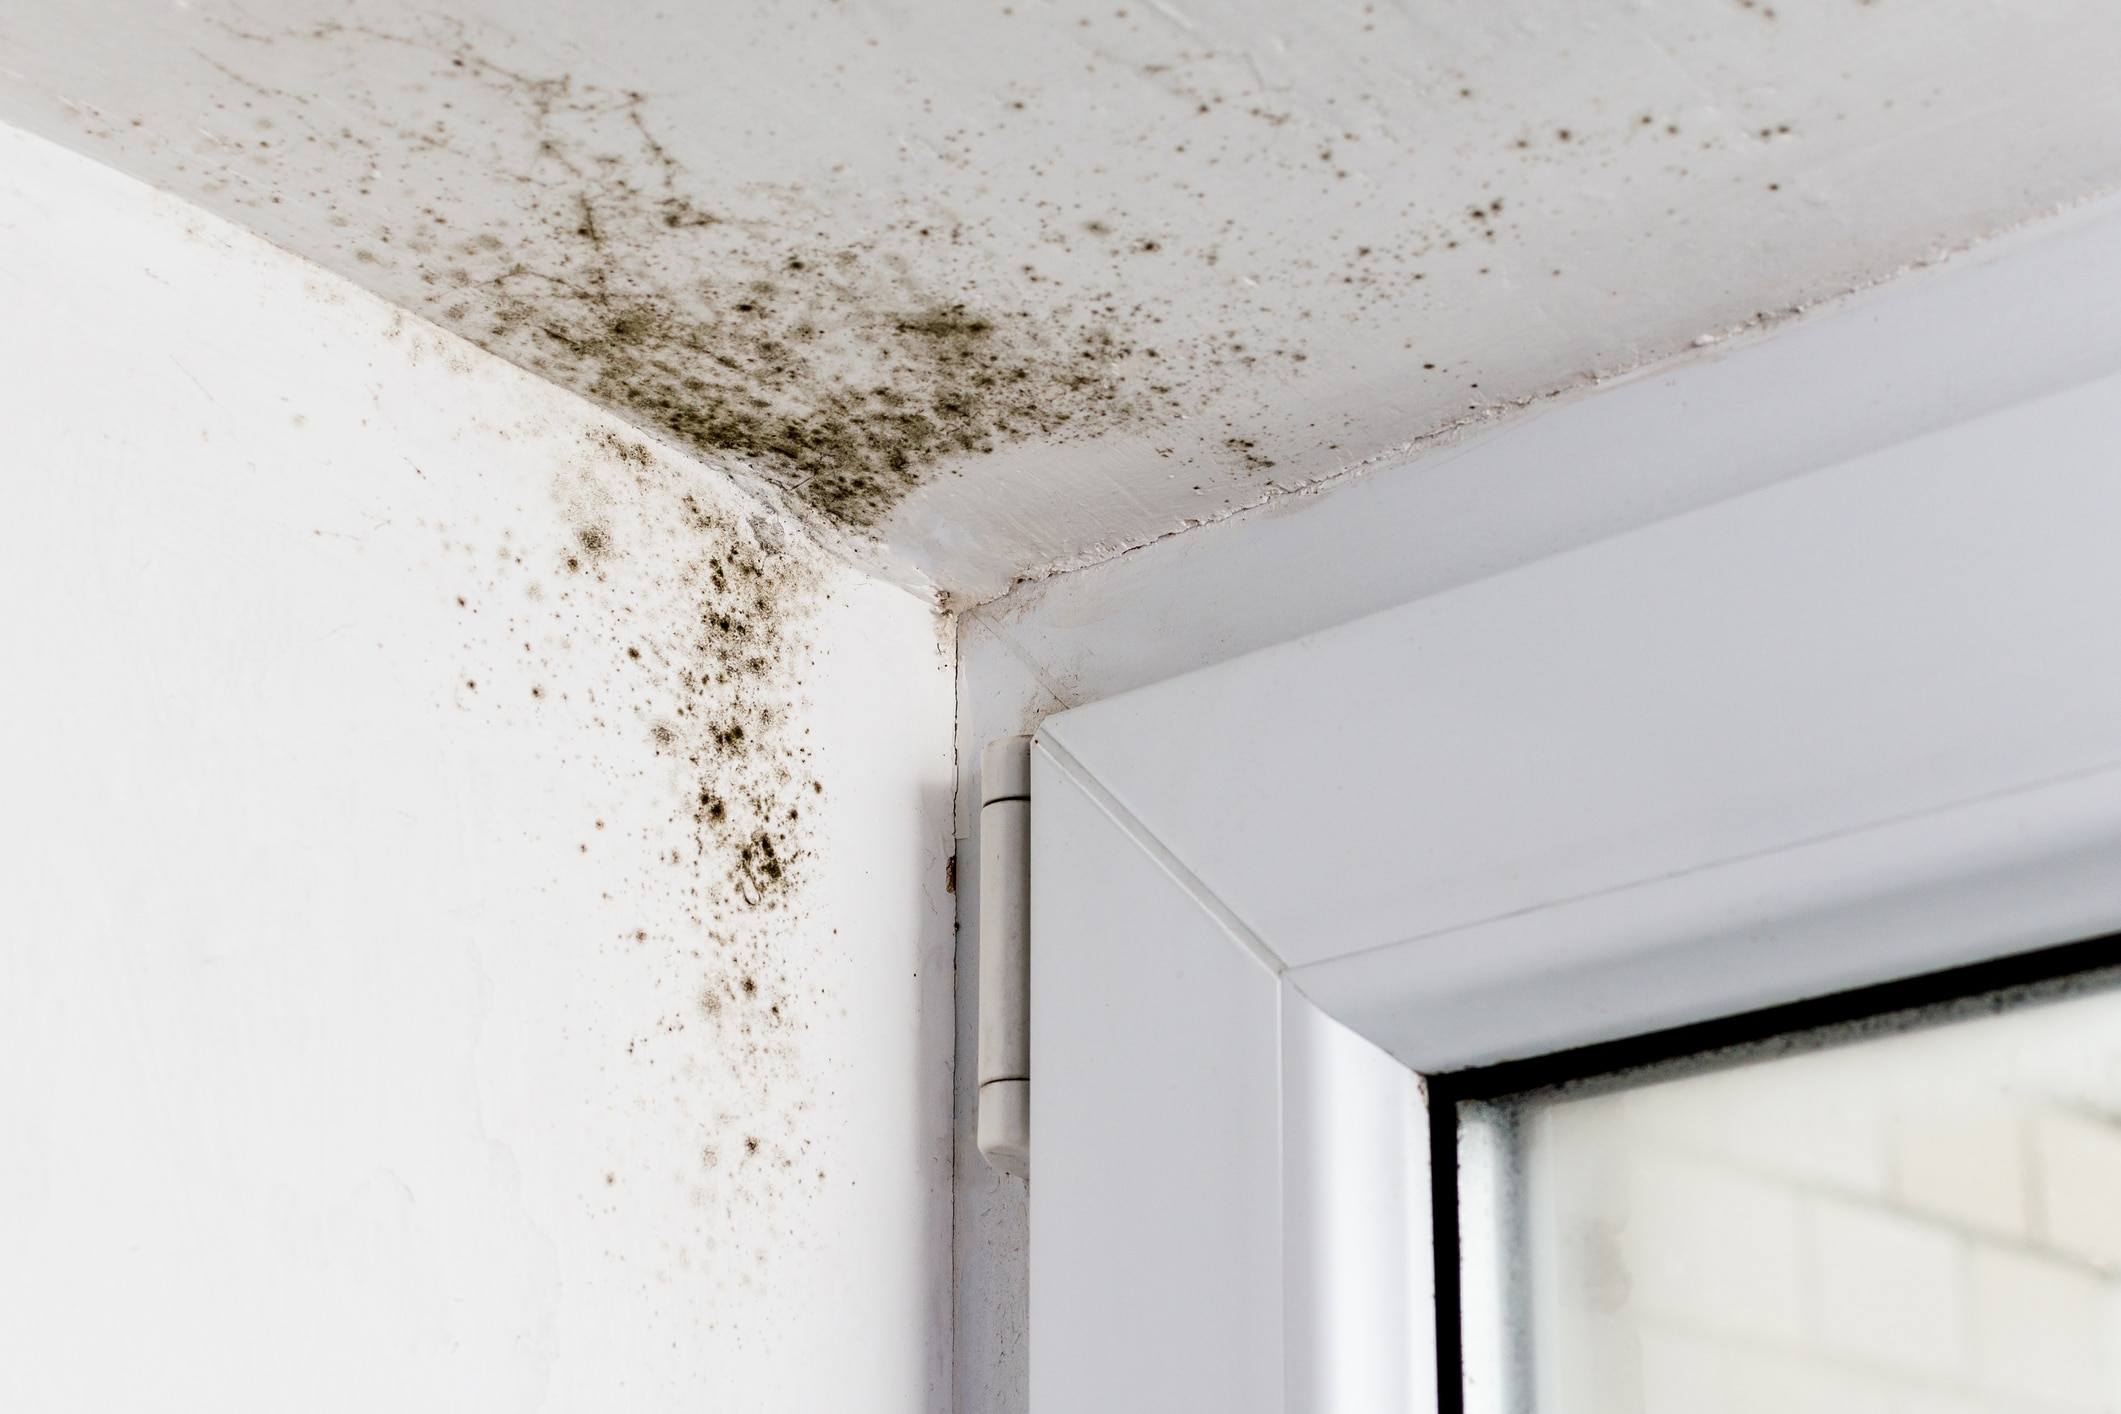 Buying A House With Mold